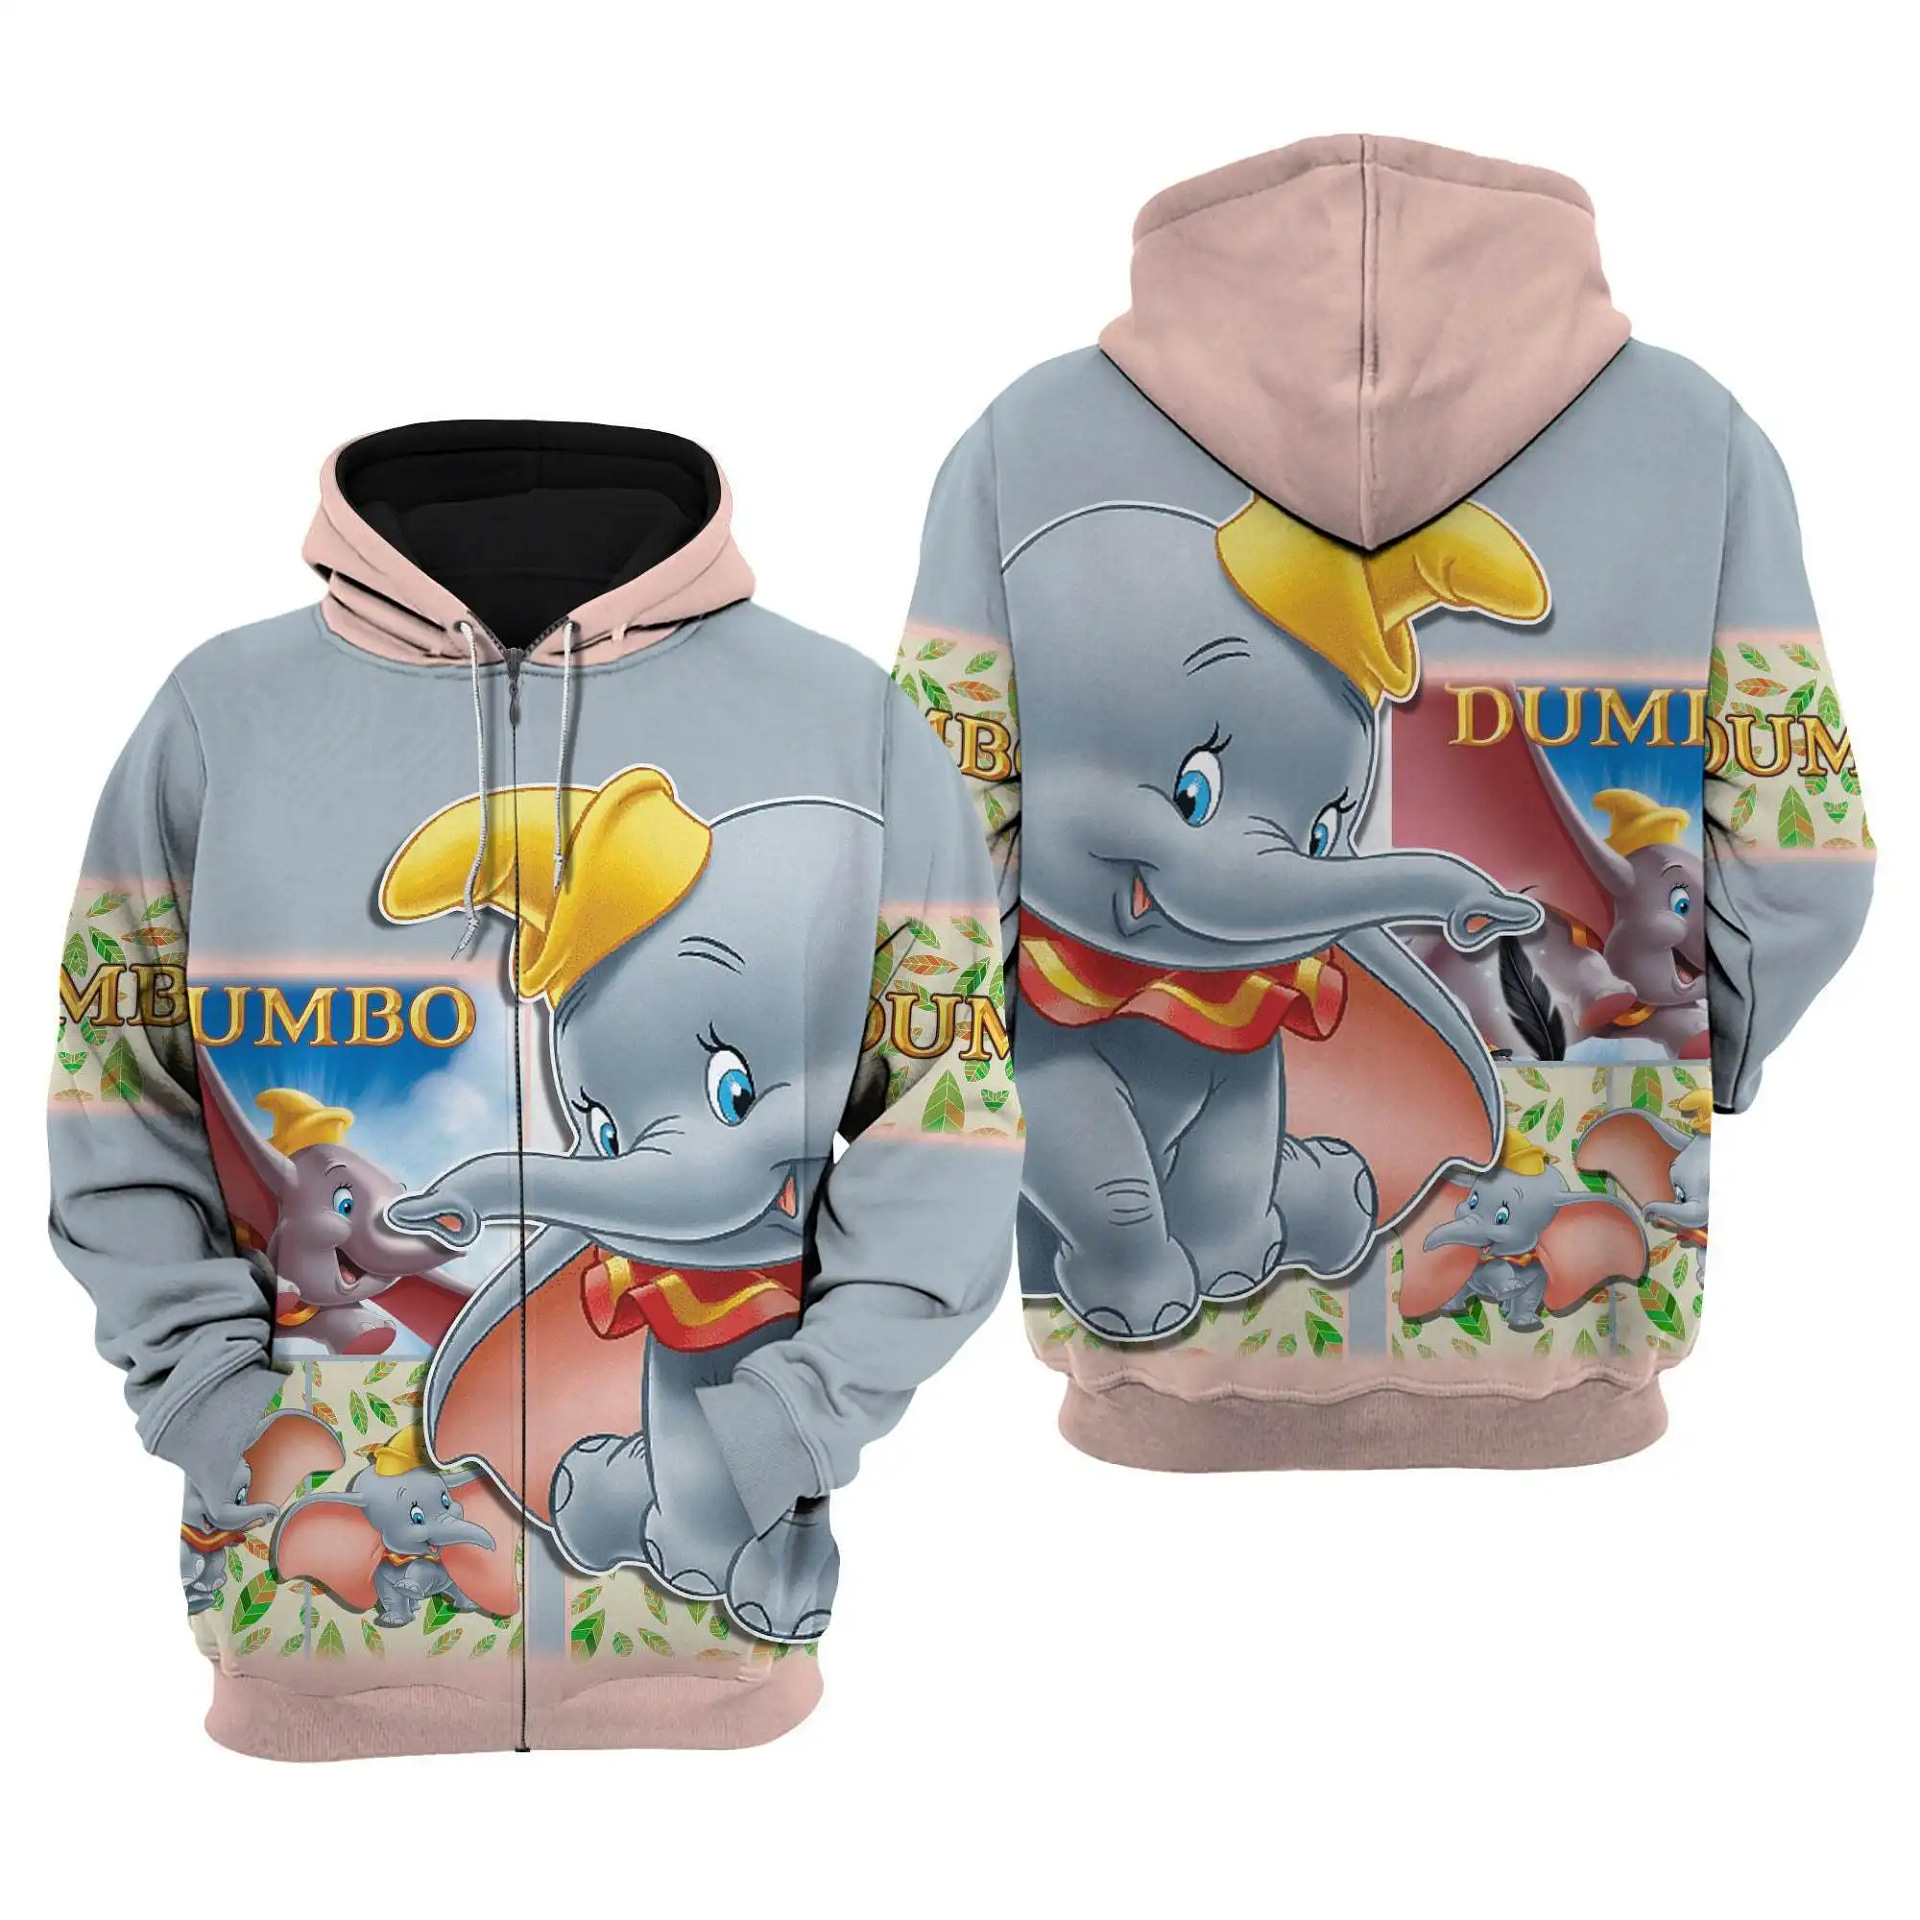 Disney Funny Dumbo Elephant Disney Graphic Cartoon Outfits Clothing Men Women Kids Toddlers Hoodie 3D